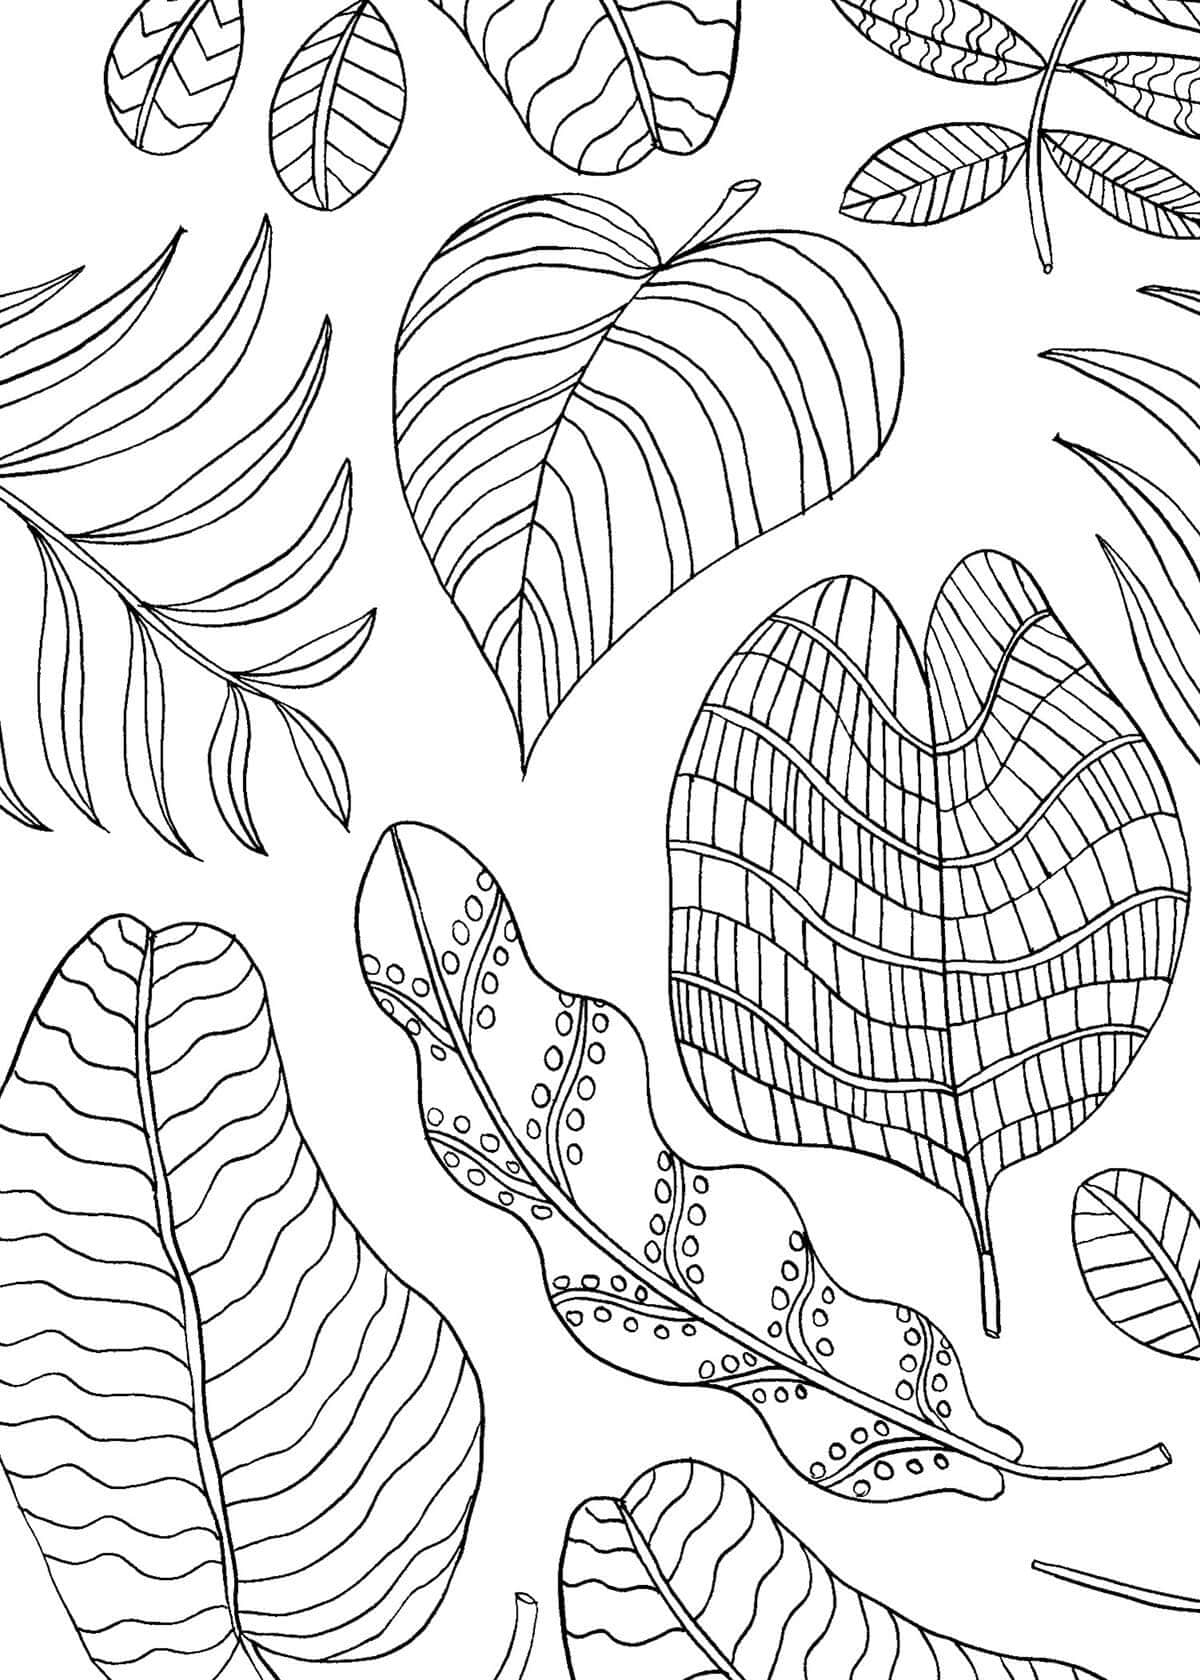 mindfulness-leaves-coloring-page-download-print-or-color-online-for-free